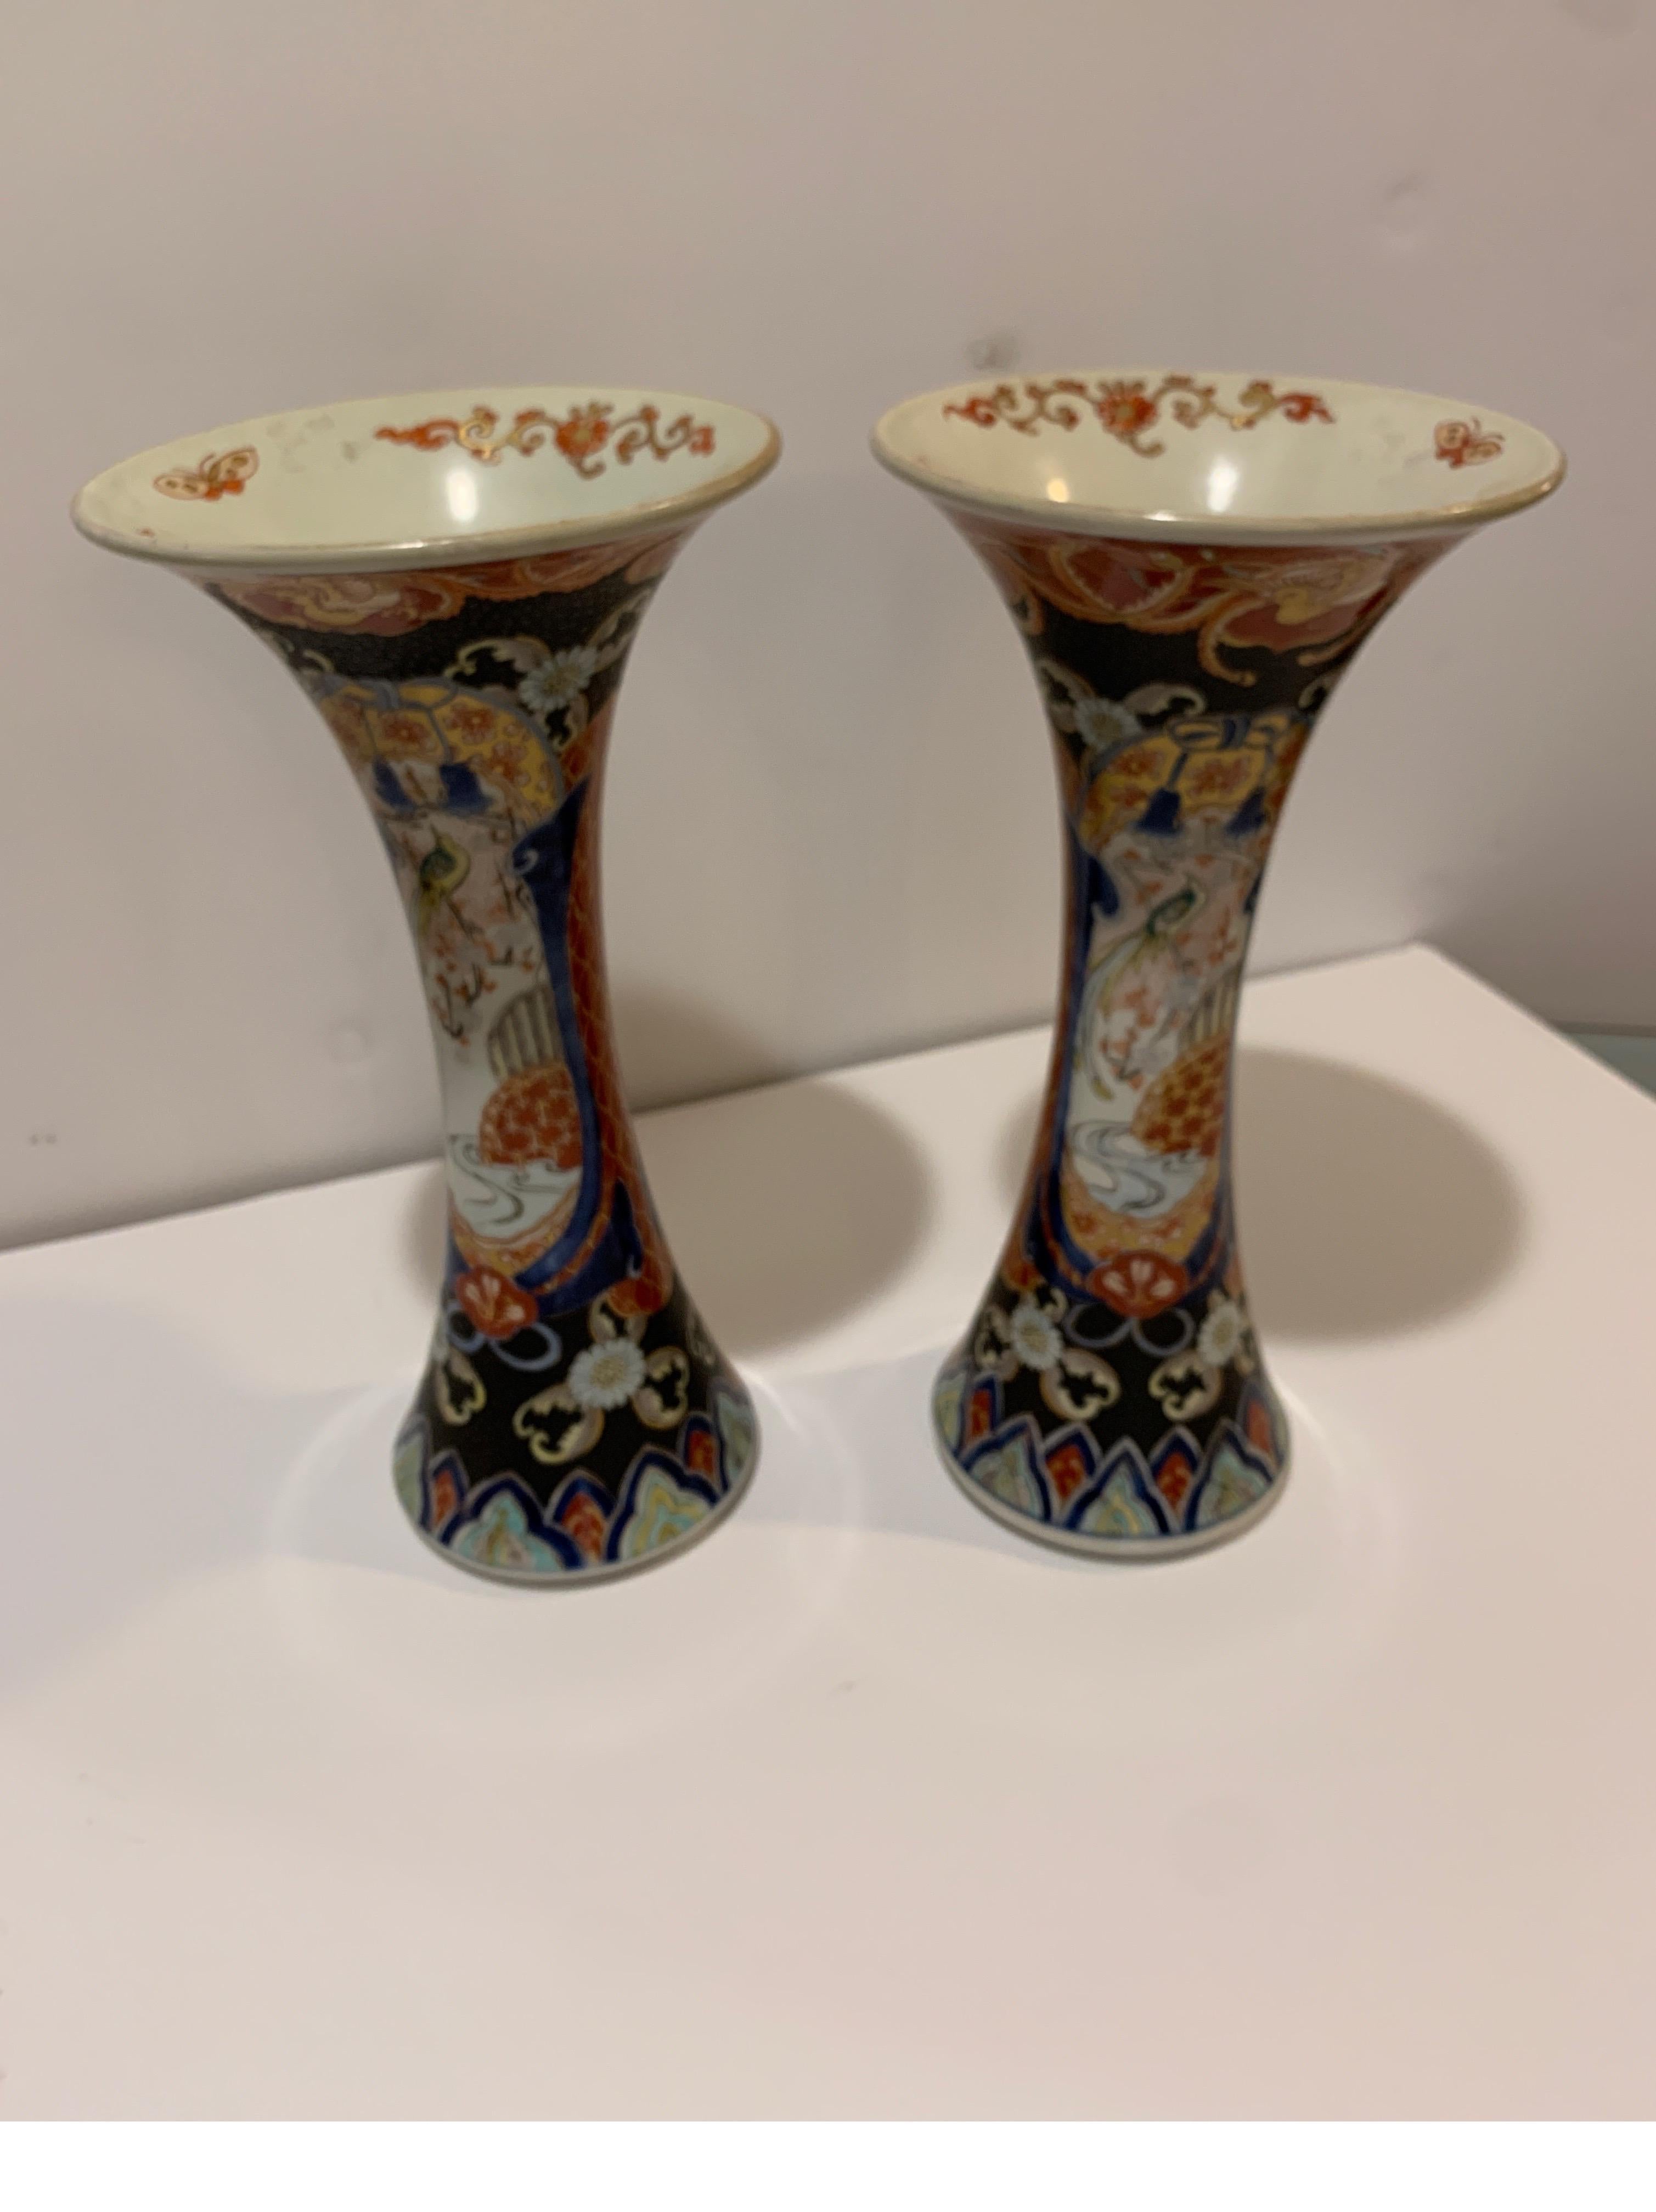 Excellent pair of hand painted Japanese Imari porcelain trumpet vases in Classic Imari iron red and blue. Rare form and an original matched pair, circa 1880, 12 inches tall.